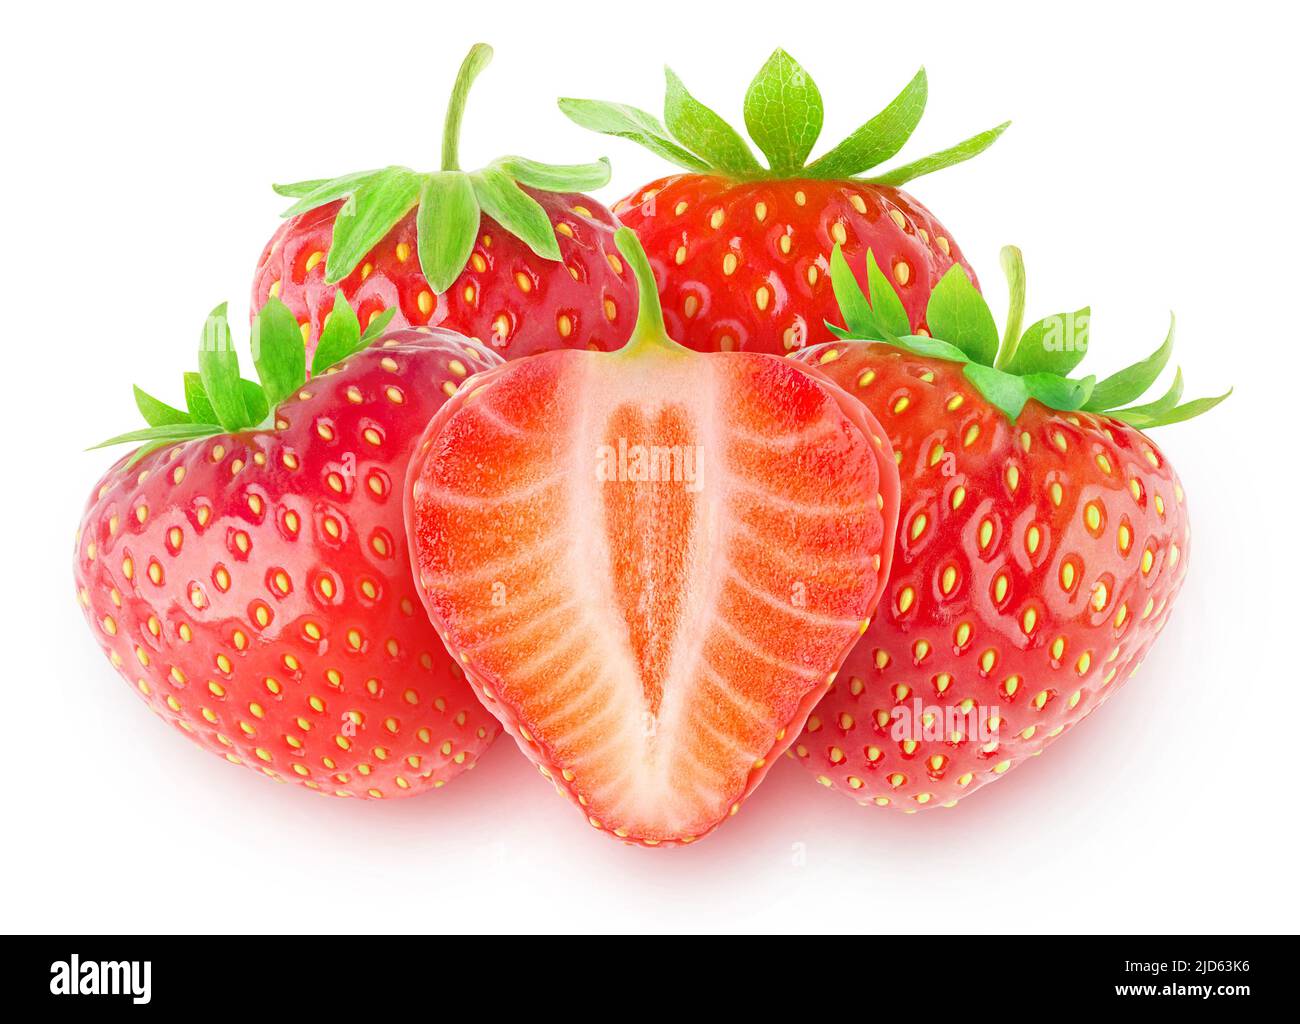 Isolated fresh strawberries. Cut strawberry fruits top view isolated on white background Stock Photo